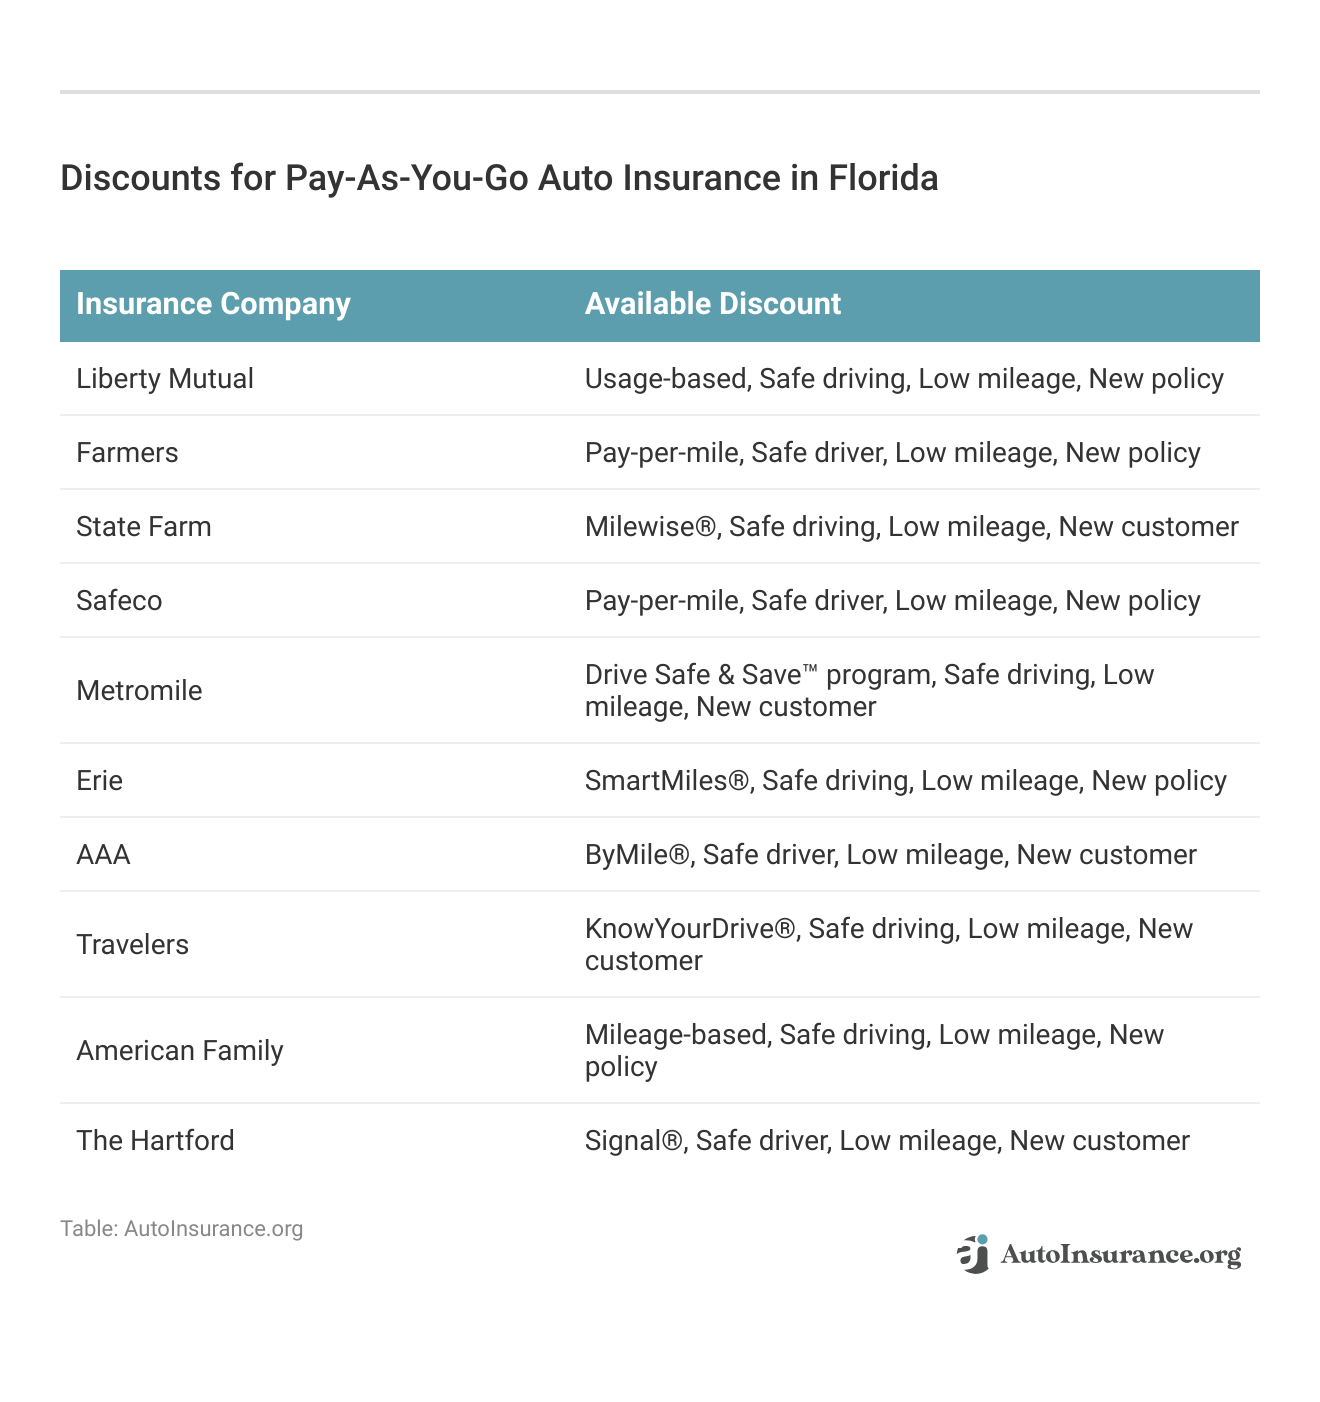 <h3>Discounts for Pay-As-You-Go Auto Insurance in Florida</h3>